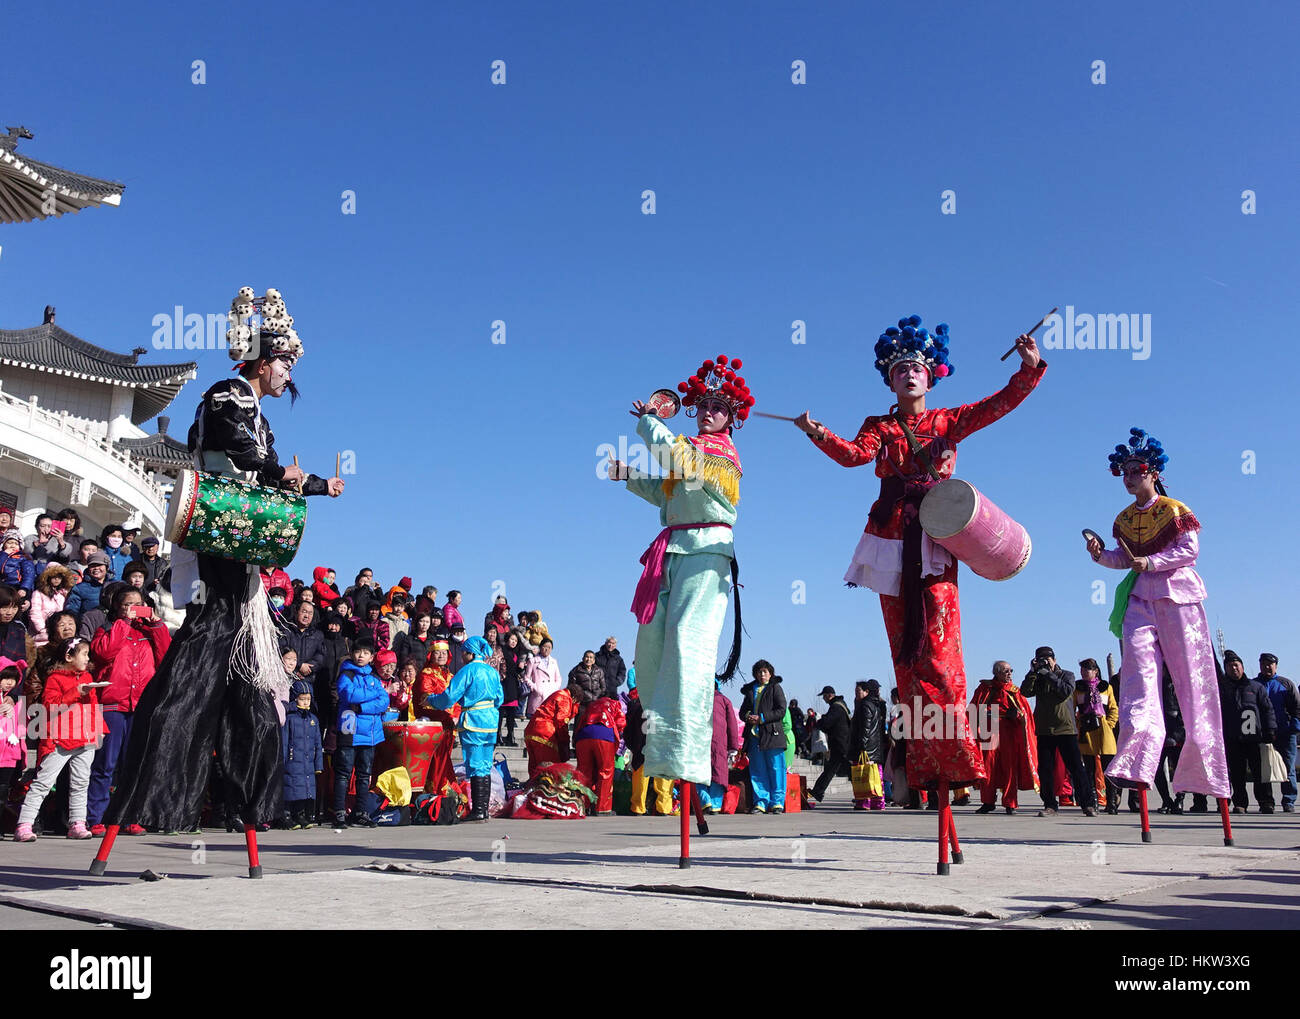 Tianjin, China. 30th Jan, 2017. Actors perform walking on stilts at a temple fair during the week-long Spring Festival holiday in Tianjin, north China, Jan. 30, 2017. Credit: Liu Xiaochuan/Xinhua/Alamy Live News Stock Photo